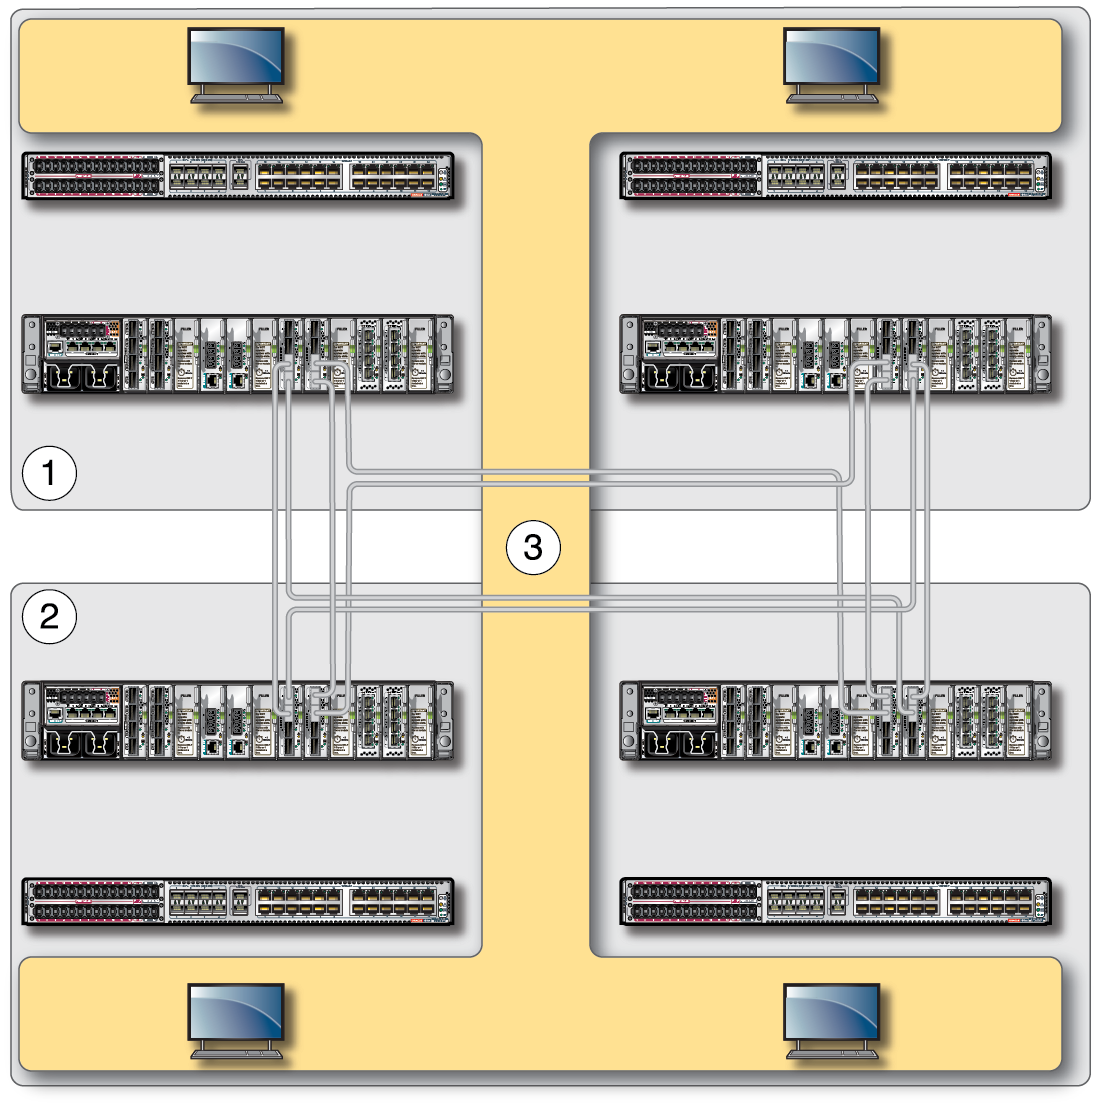 image:Illustration shows the common subnet that enables host                             communication between the two datacenters.